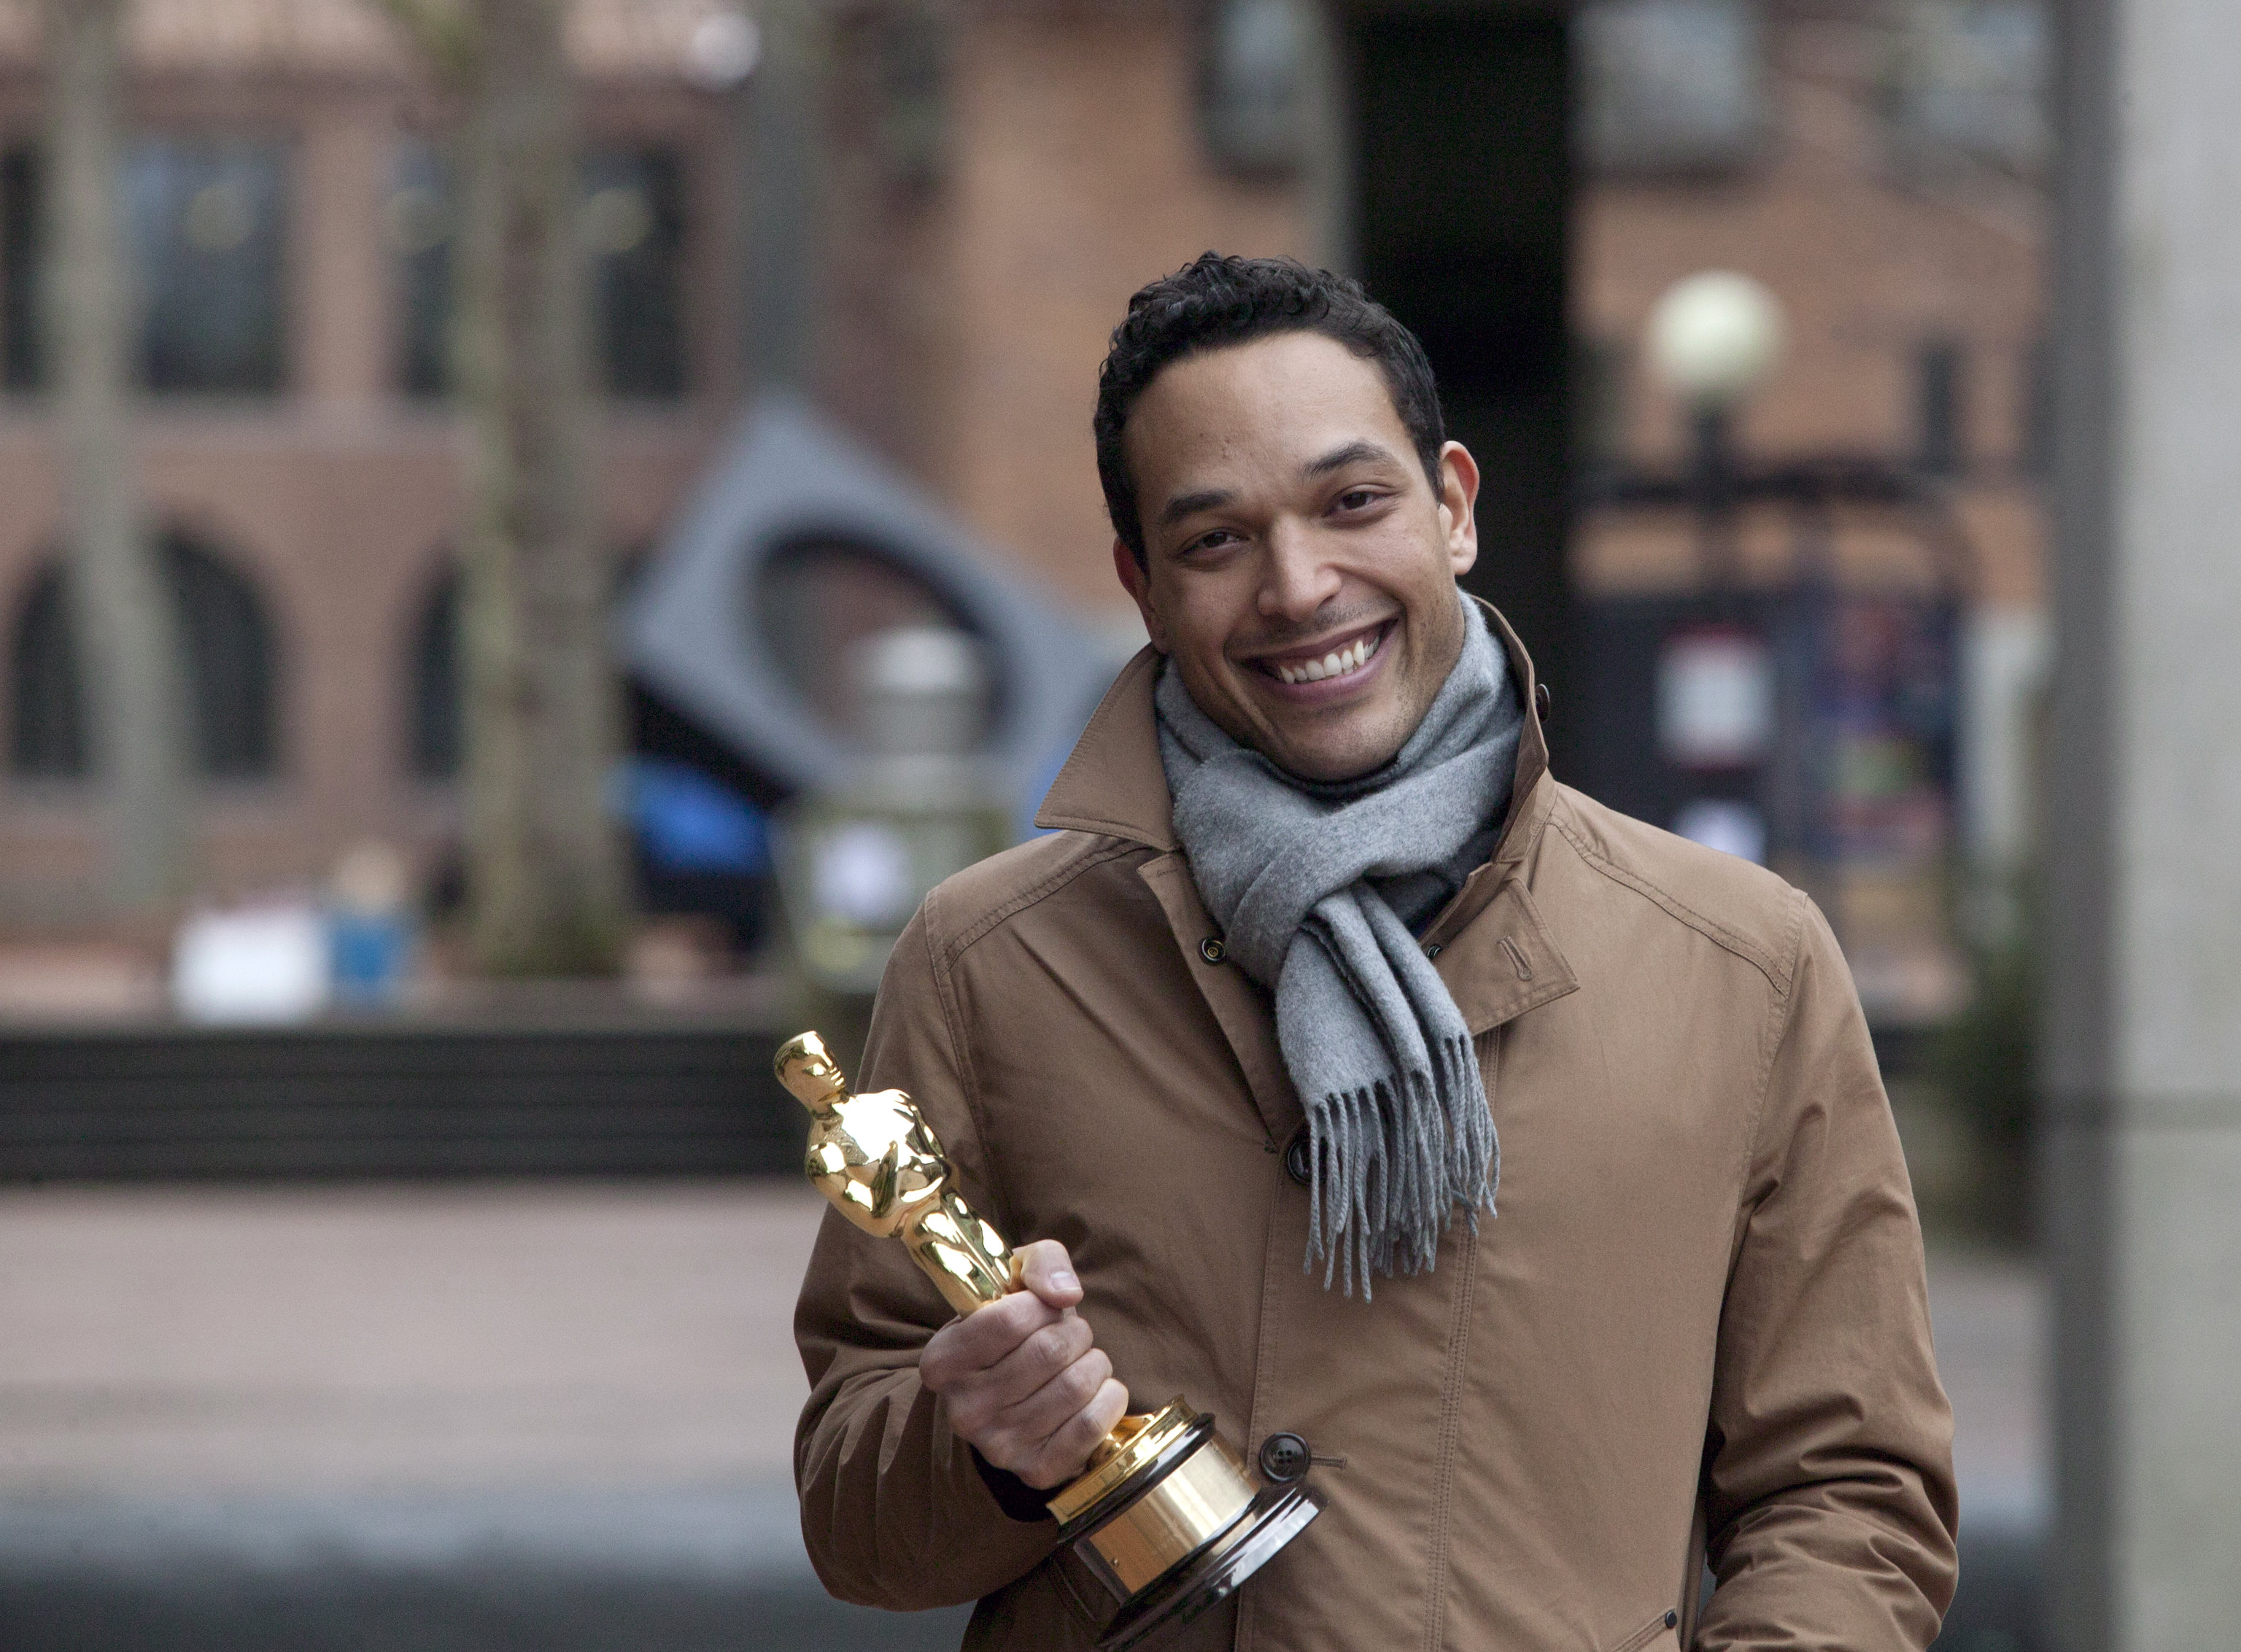 TJ is wearing a tan jacket and a thick scarf. He is smiling and holding his Oscar award. Behind him, Sky Viewing Sculpture and Miller Hall are visible.